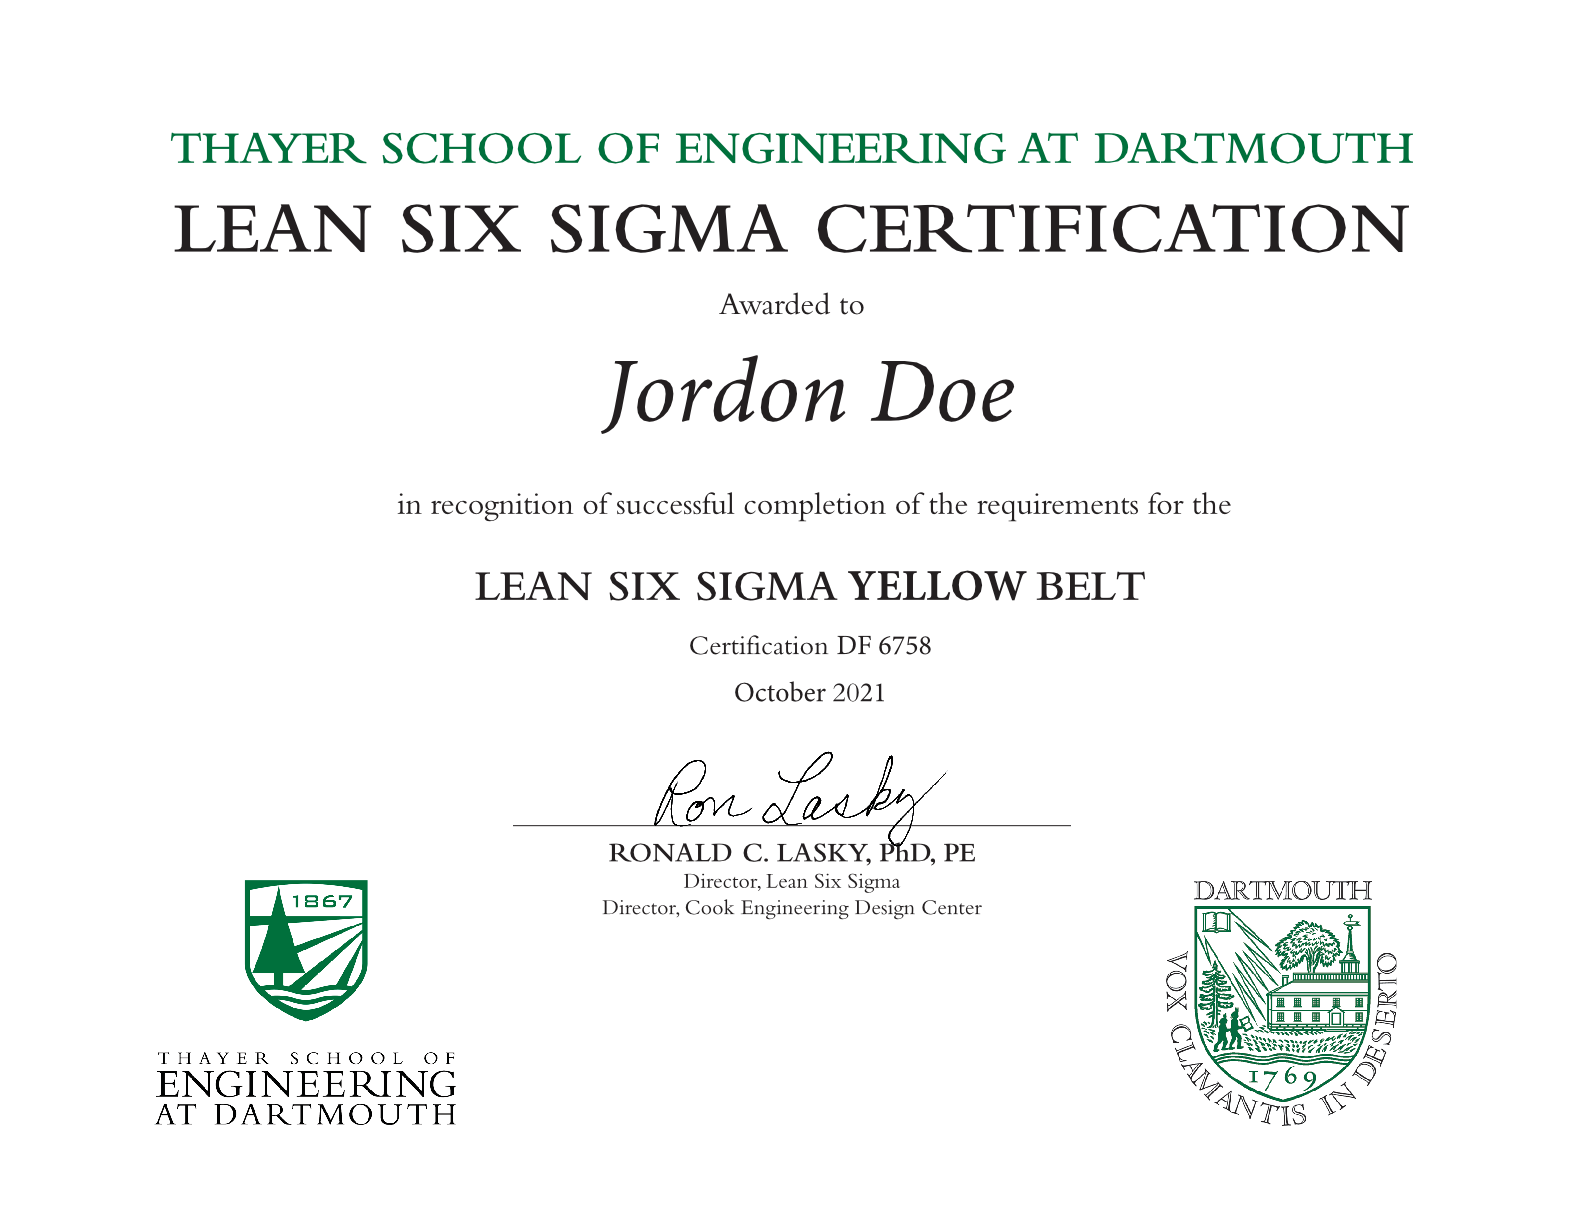 Thayer School of Engineering at Dartmouth Lean Six Sigma Yellow Certification Certificate